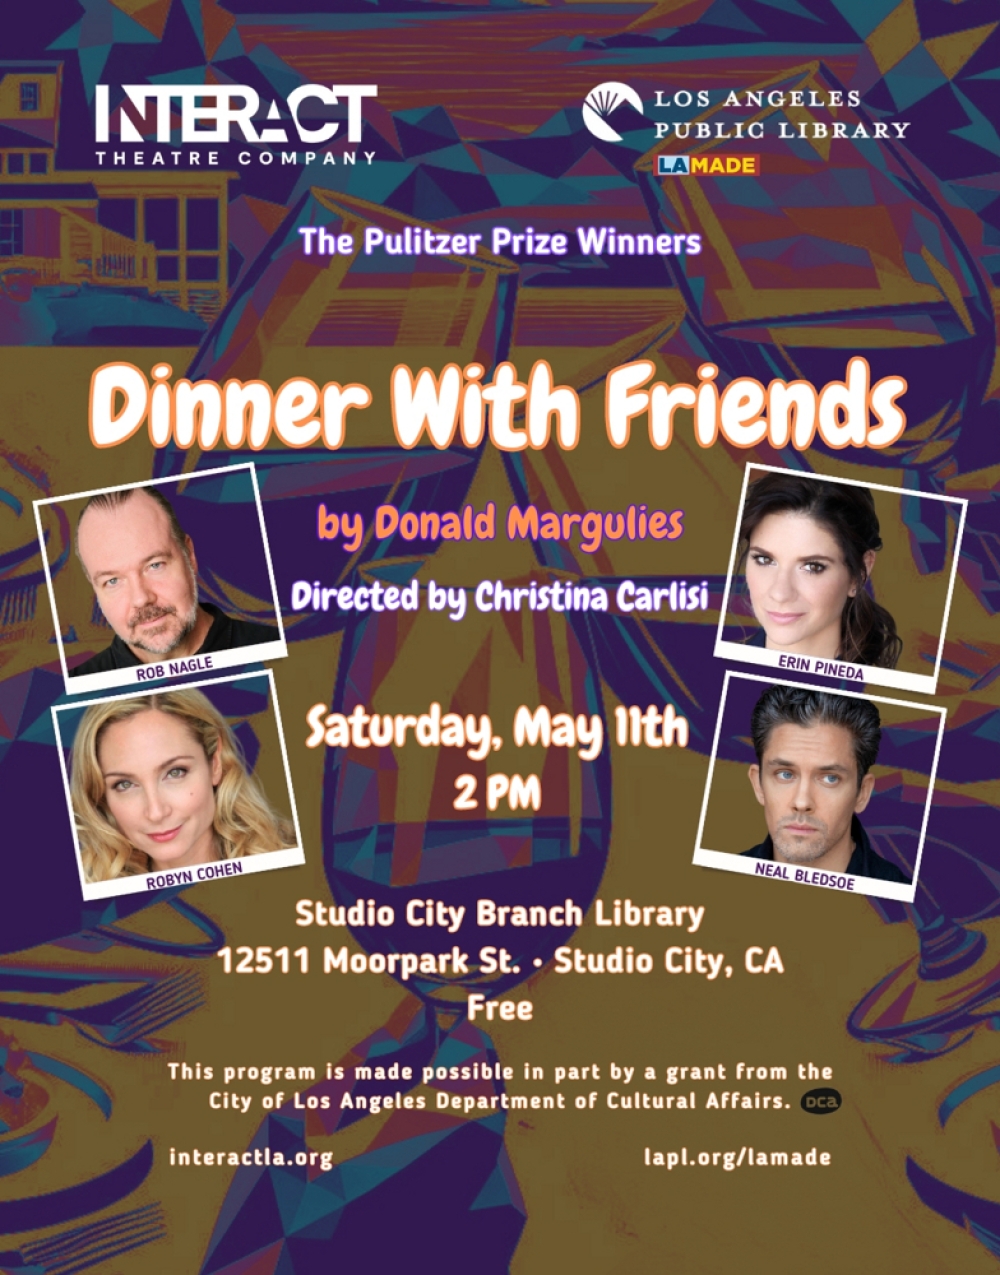 DINNER WITH FRIENDS by Donald Margulies - INTERACT THEATRE COMPANY Stage Mag